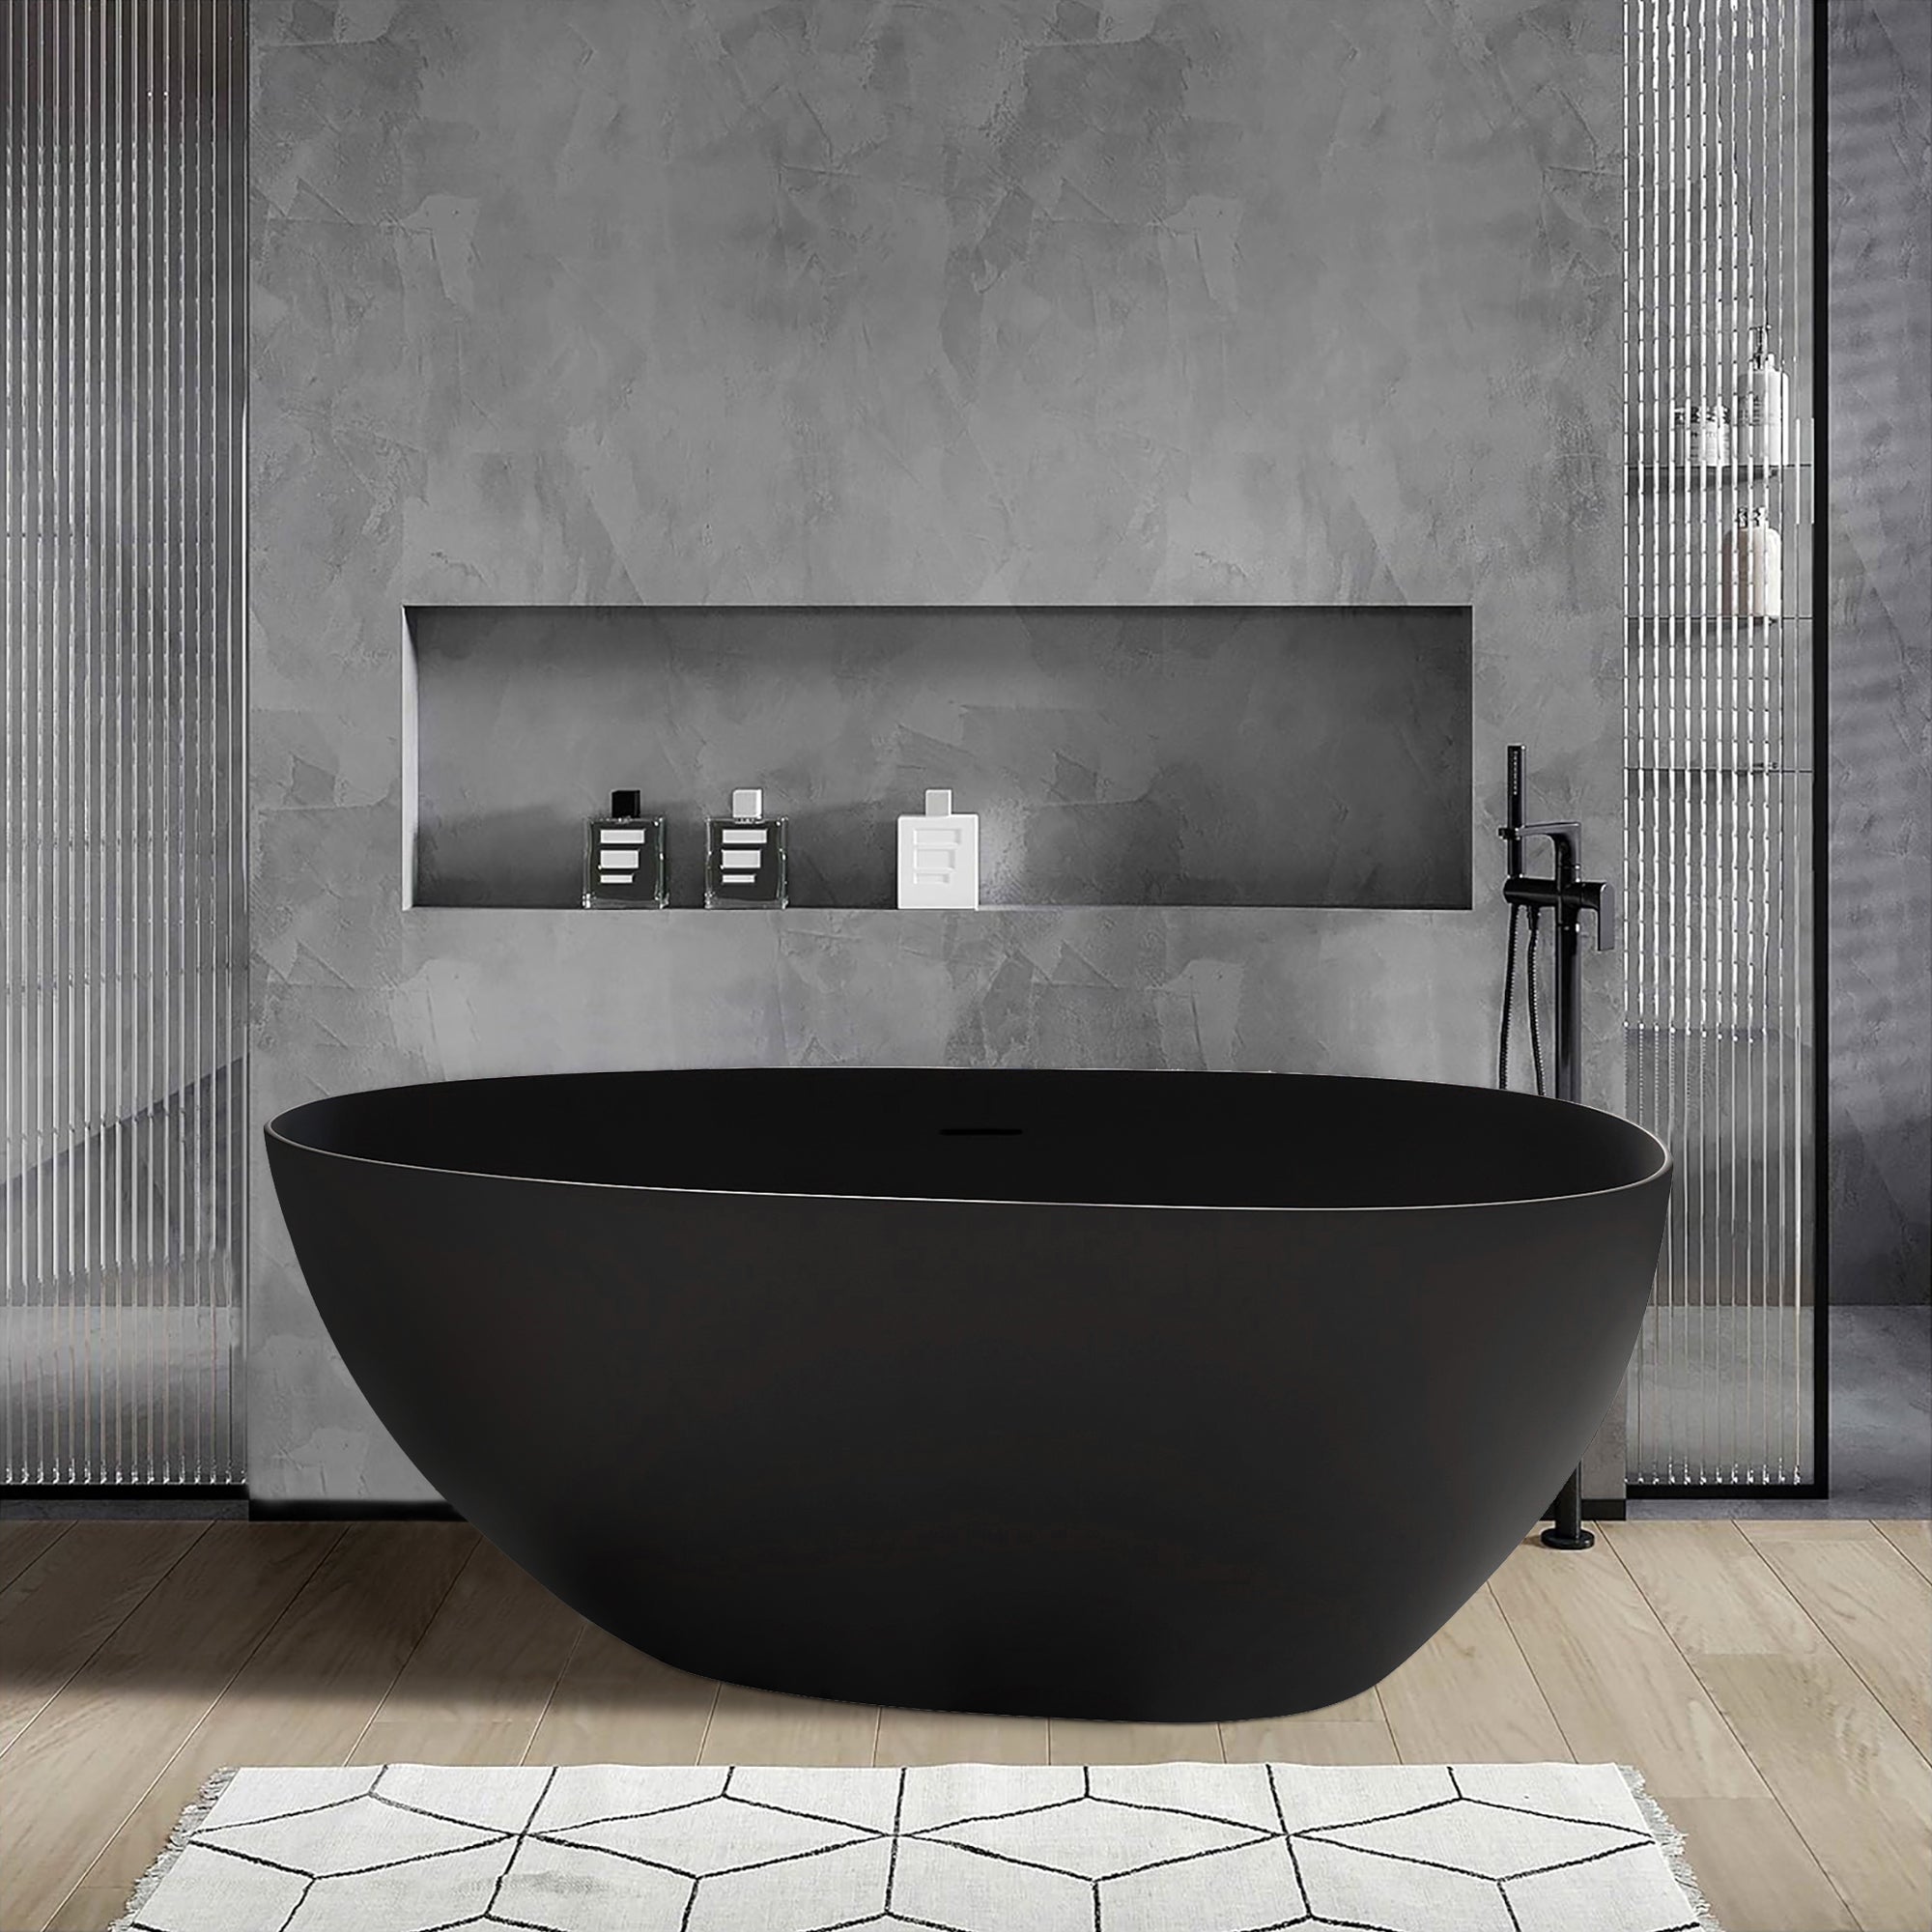 59" Oval Shaped Freestanding Solid Surface Soaking Bathtub with Overflow RX-S01-59MB